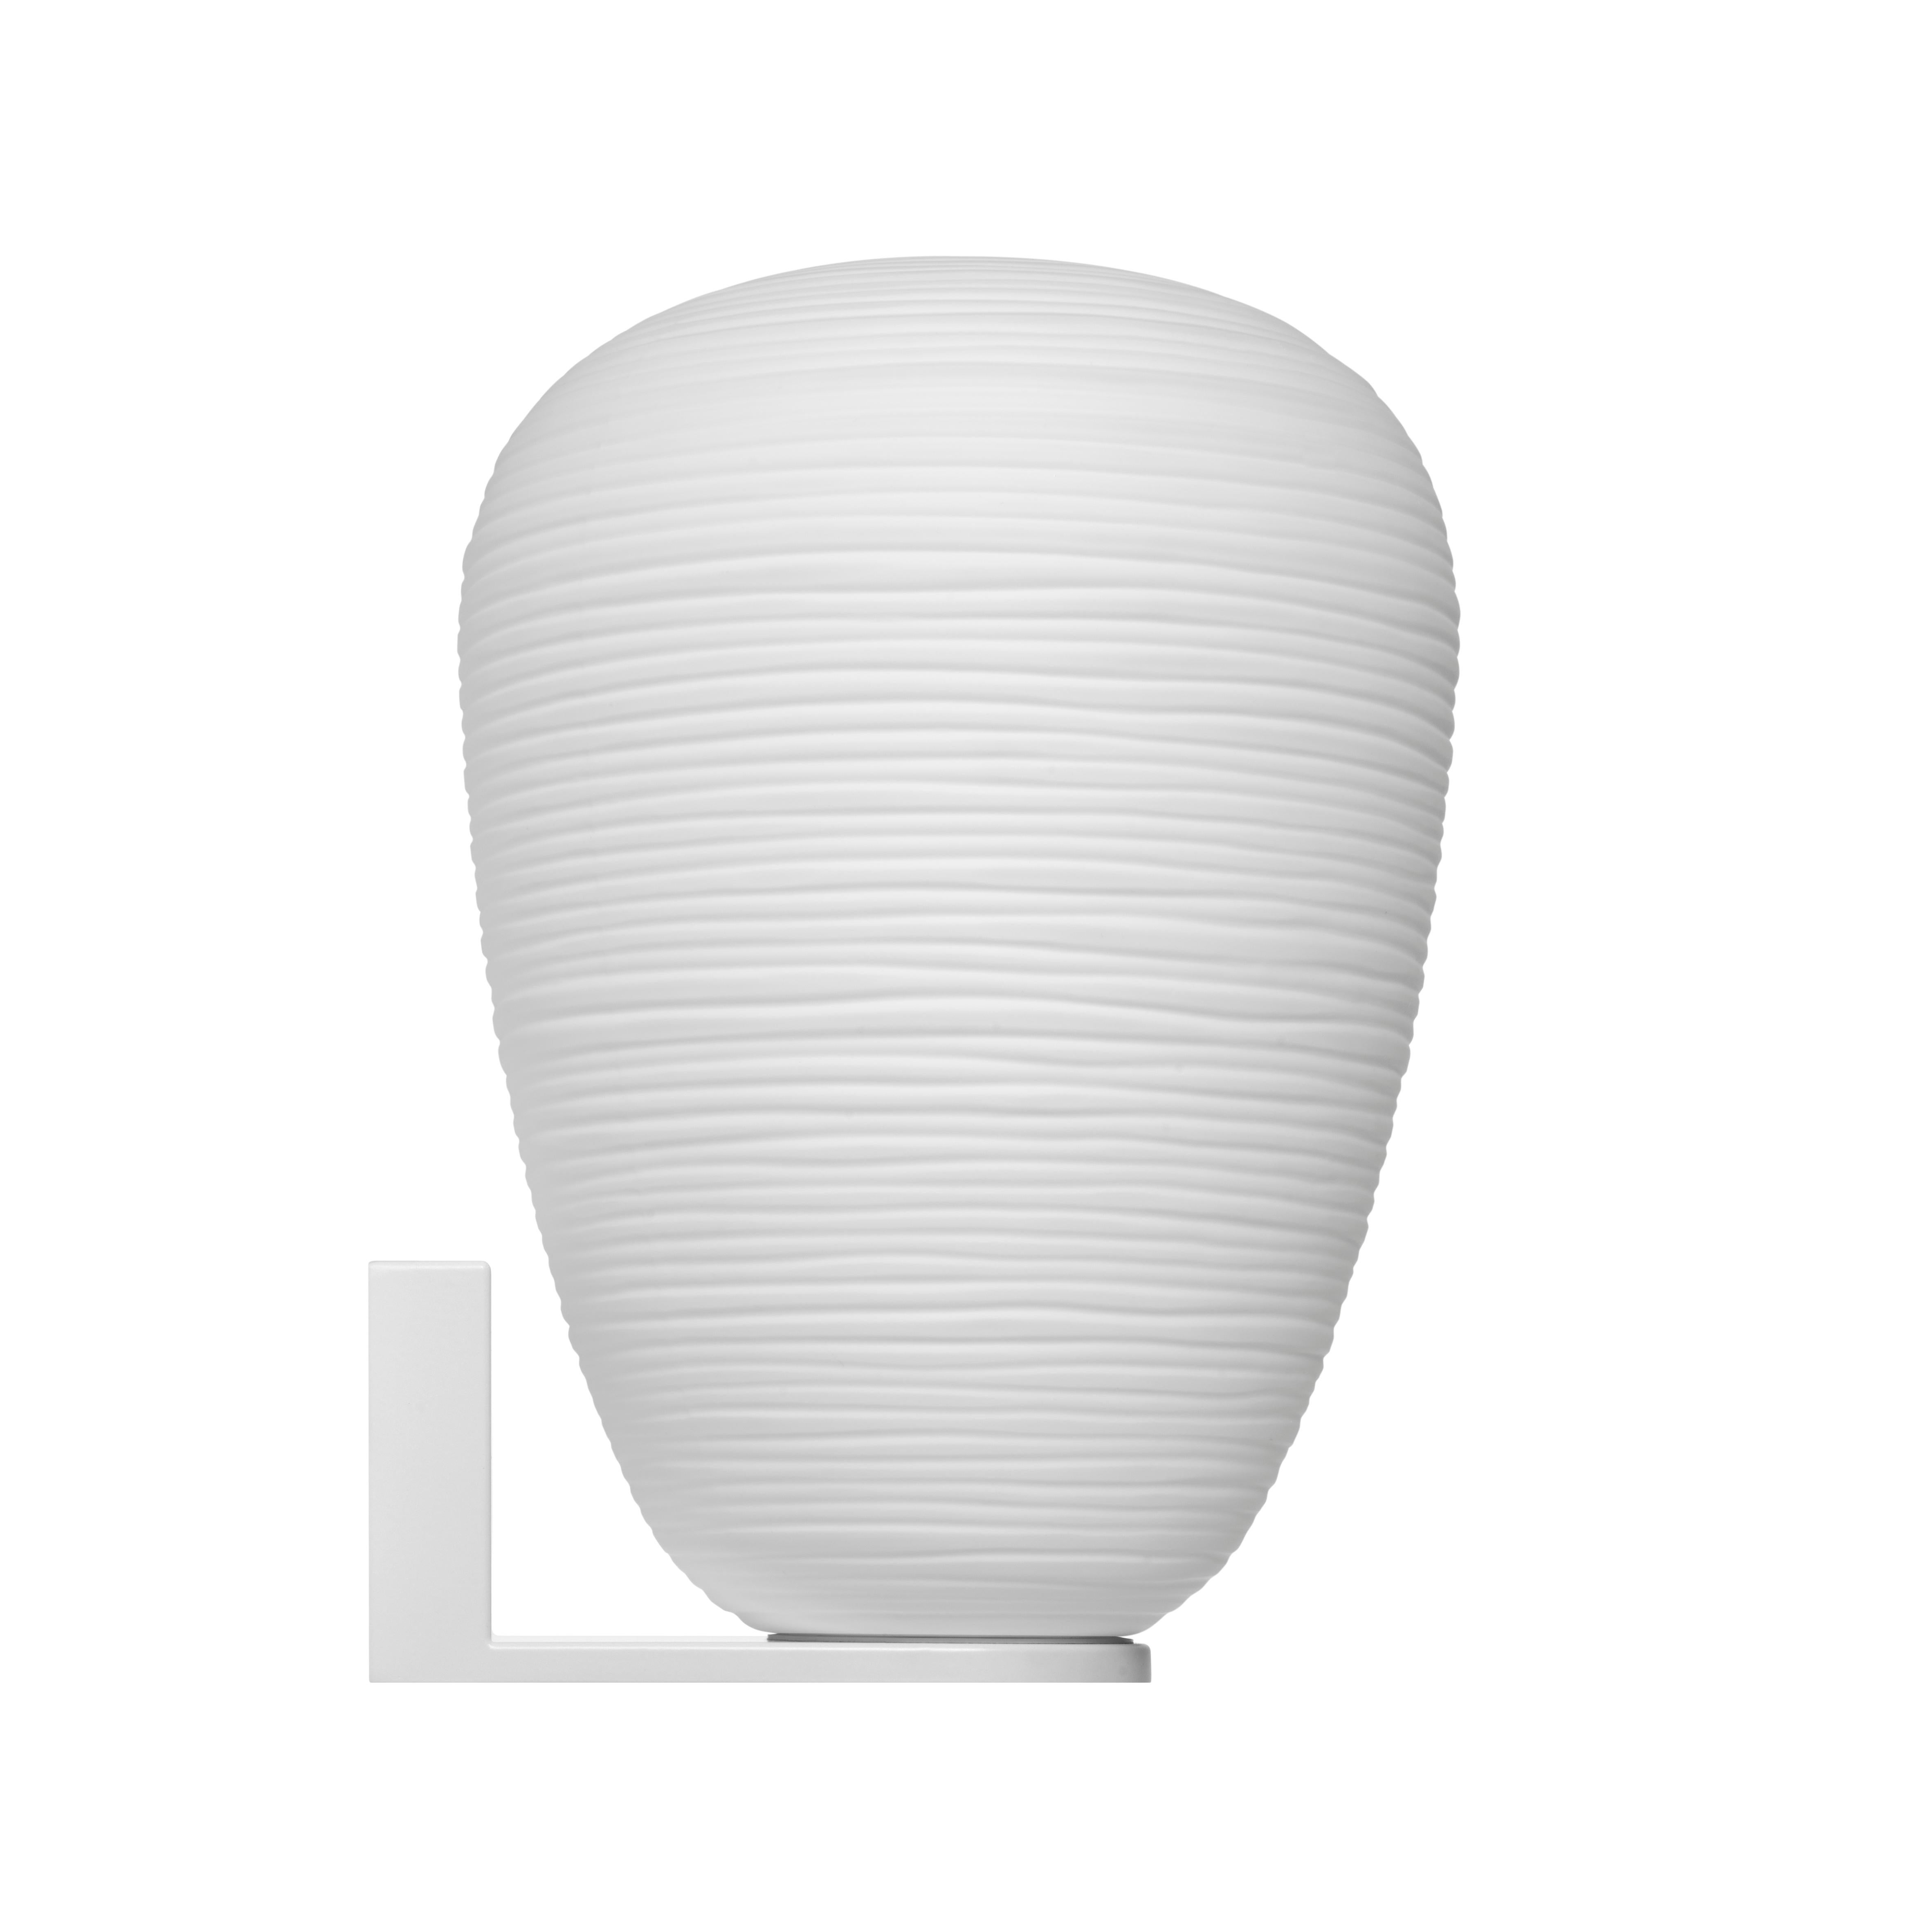 Foscarini Rituals 1 Wall Lamp in White by Ludovica and Roberto Palomba